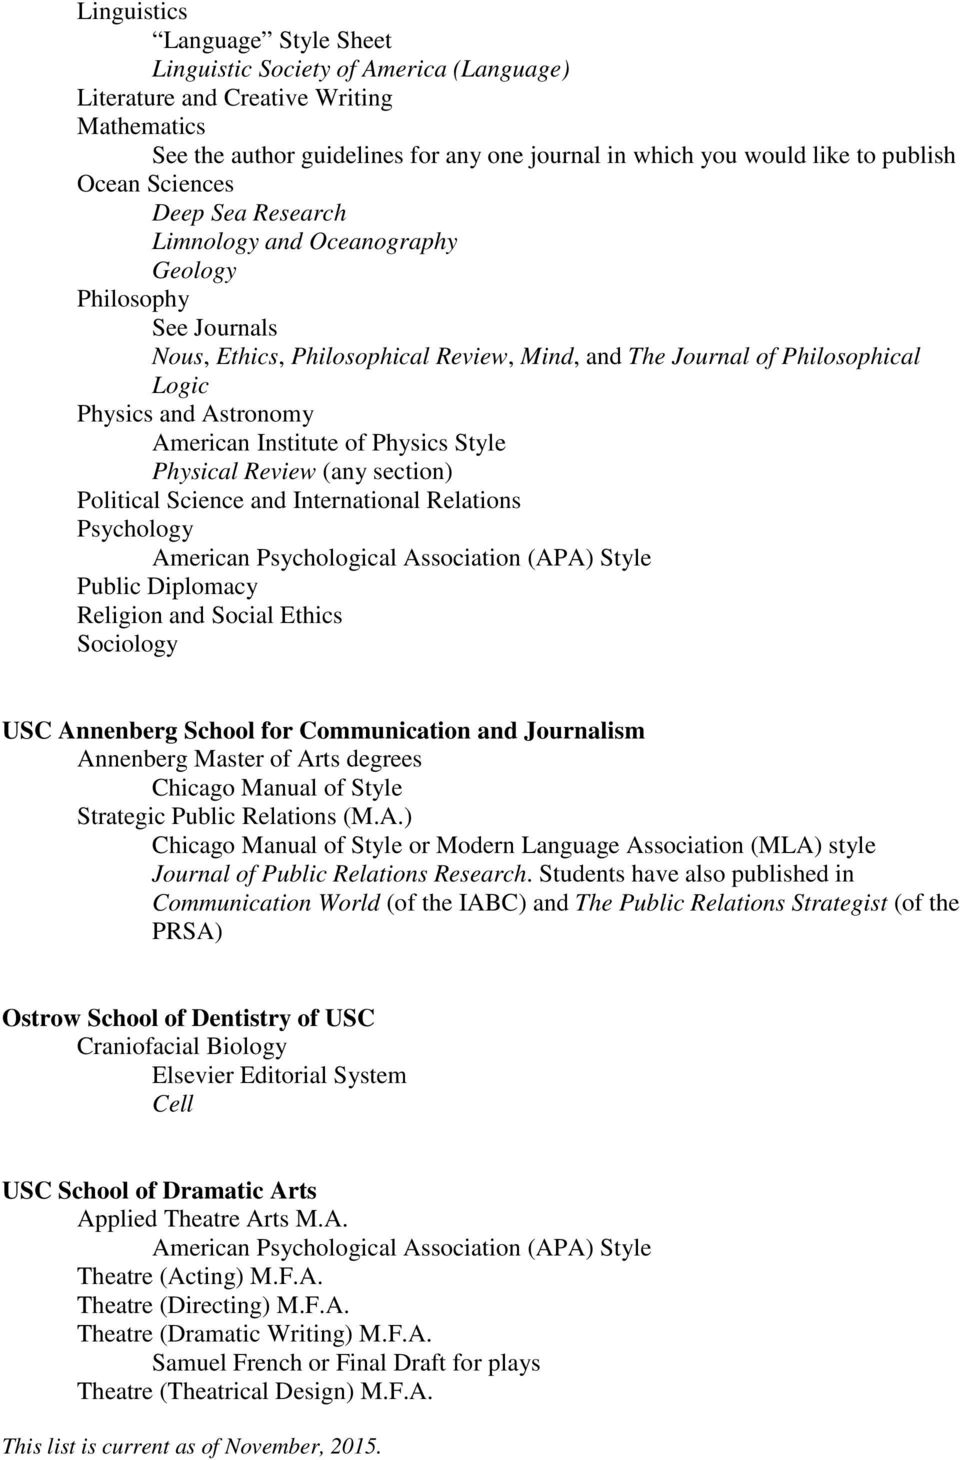 American Institute of Physics Style Physical Review (any section) Political Science and International Relations Psychology Public Diplomacy Religion and Social Ethics Sociology USC Annenberg School